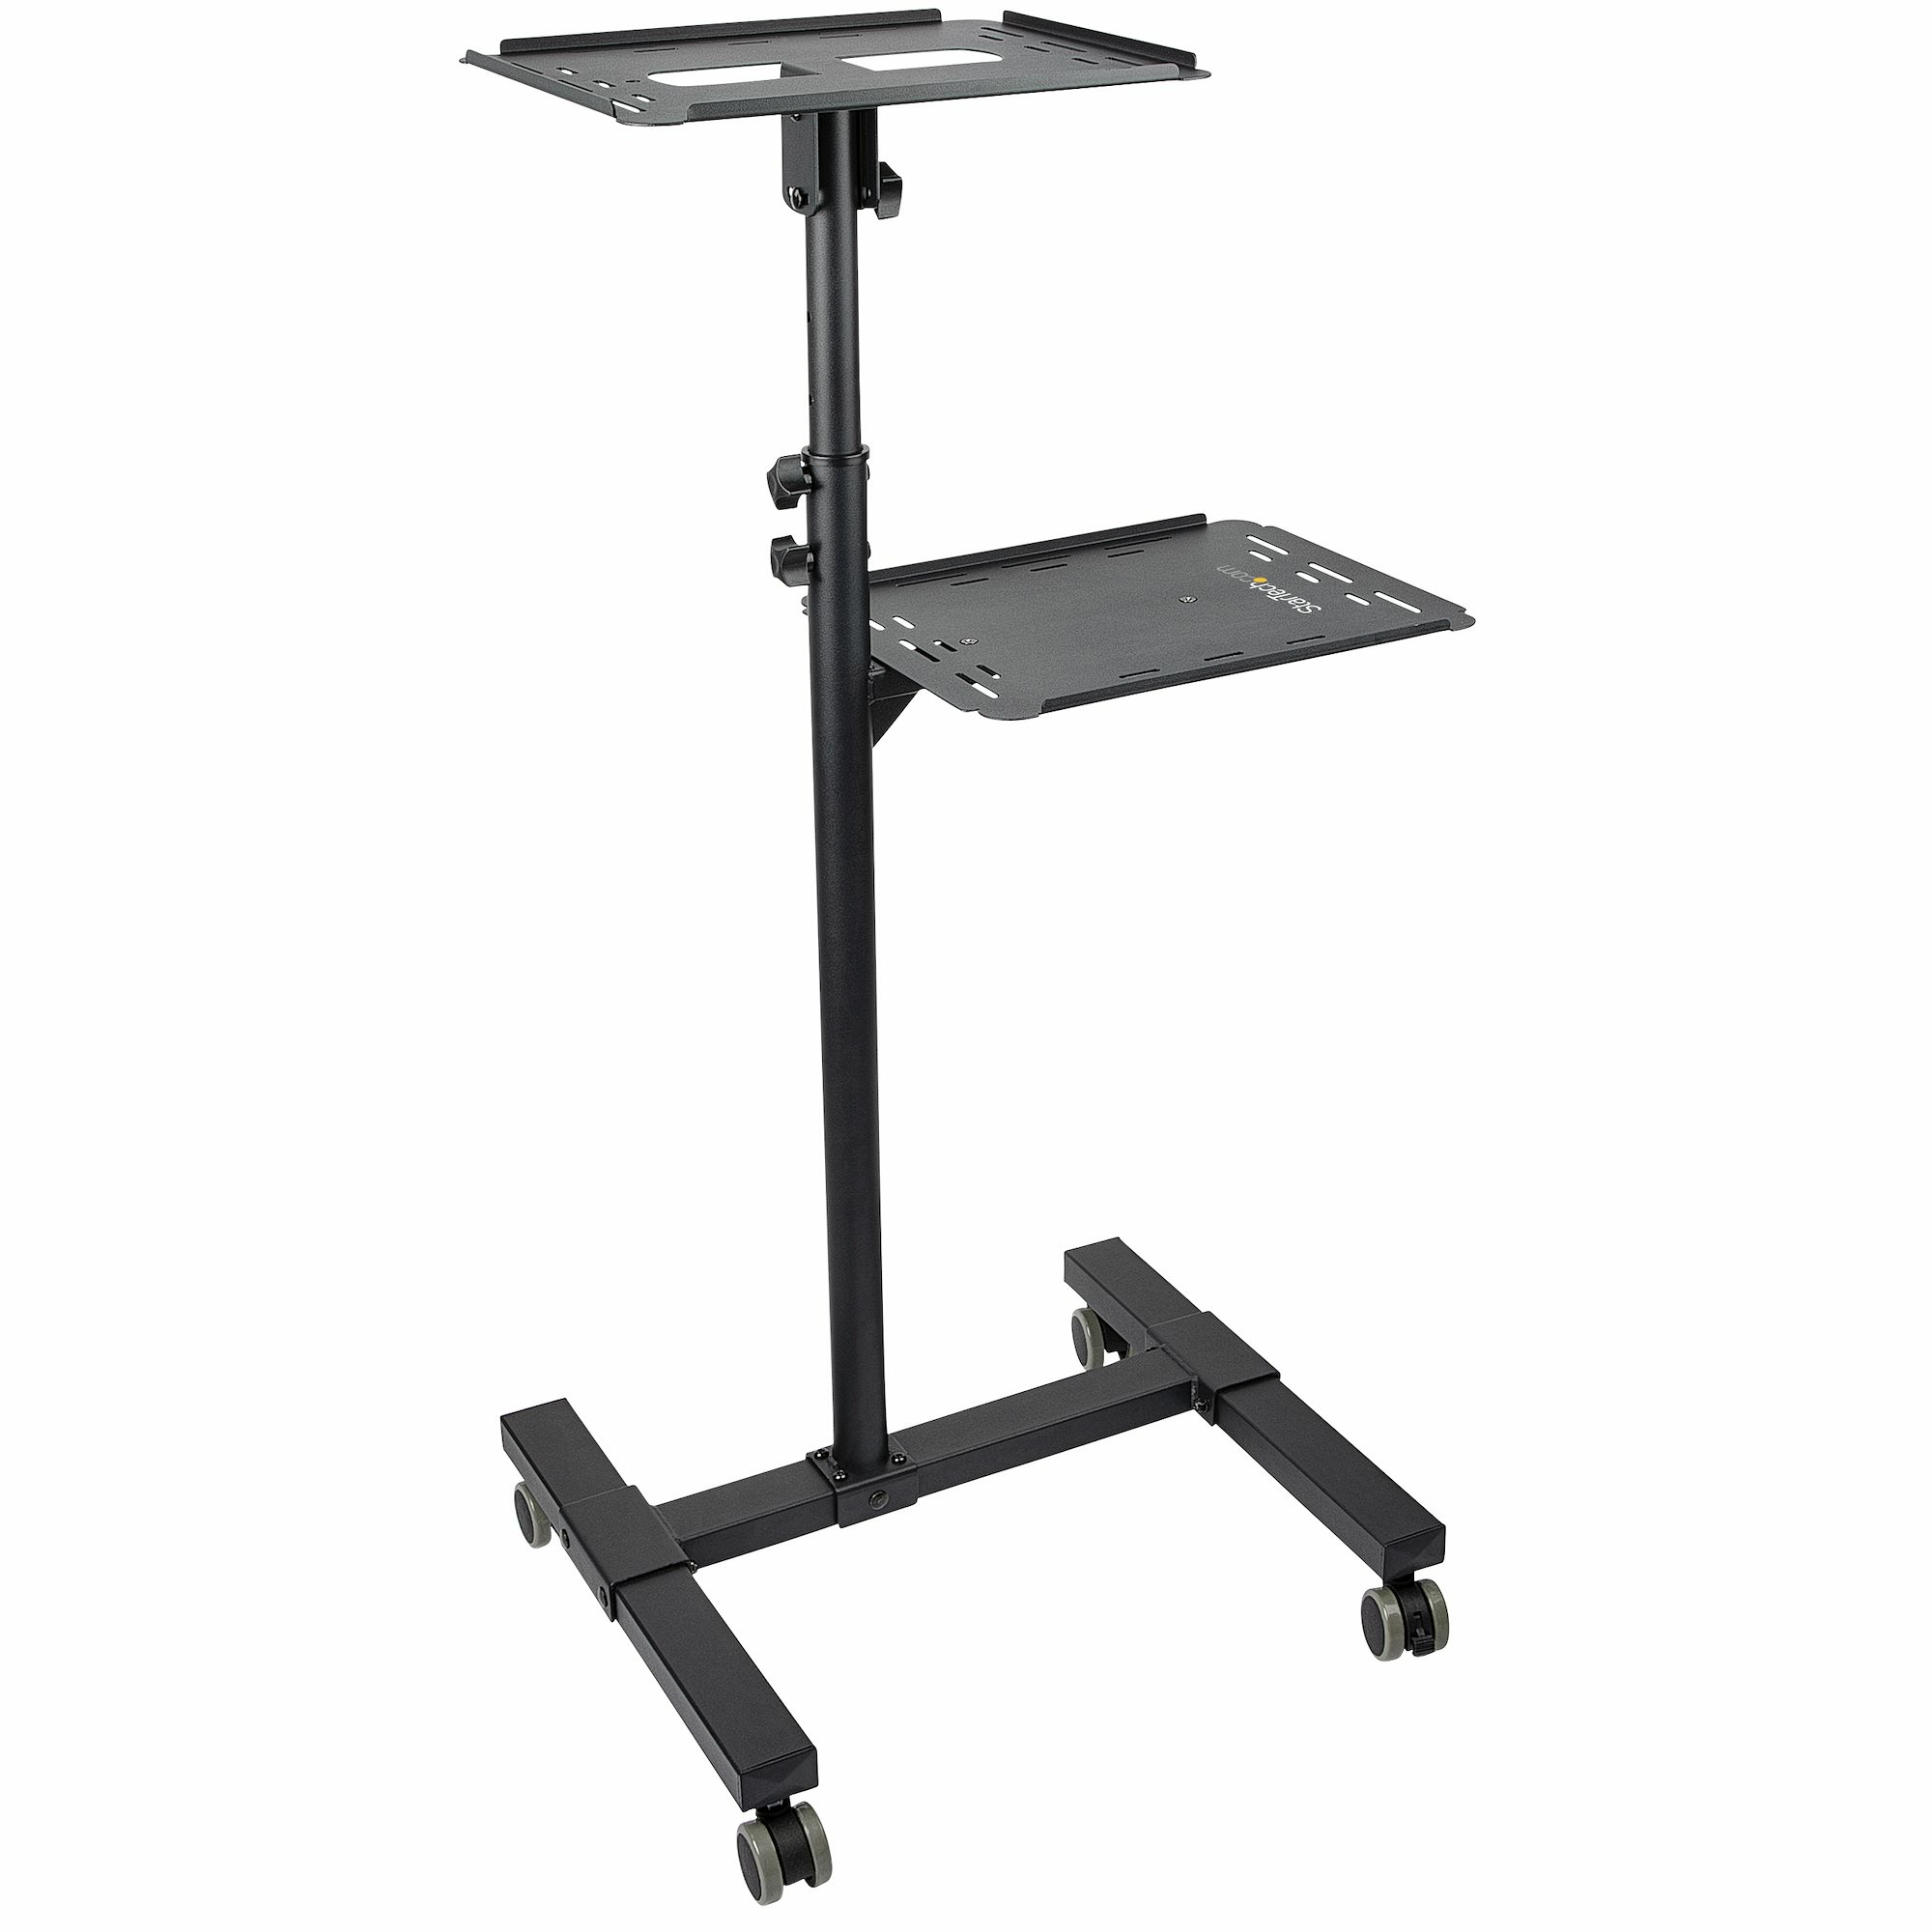 StarTech.com Mobile Projector And Laptop Stand/Cart, Heavy Duty Portable Projector Stand (2 Vented Shelves, Hold 22lb/10kg Each), Height Adjustable Rolling AV Presentation Cart With Wheels -  - C2000